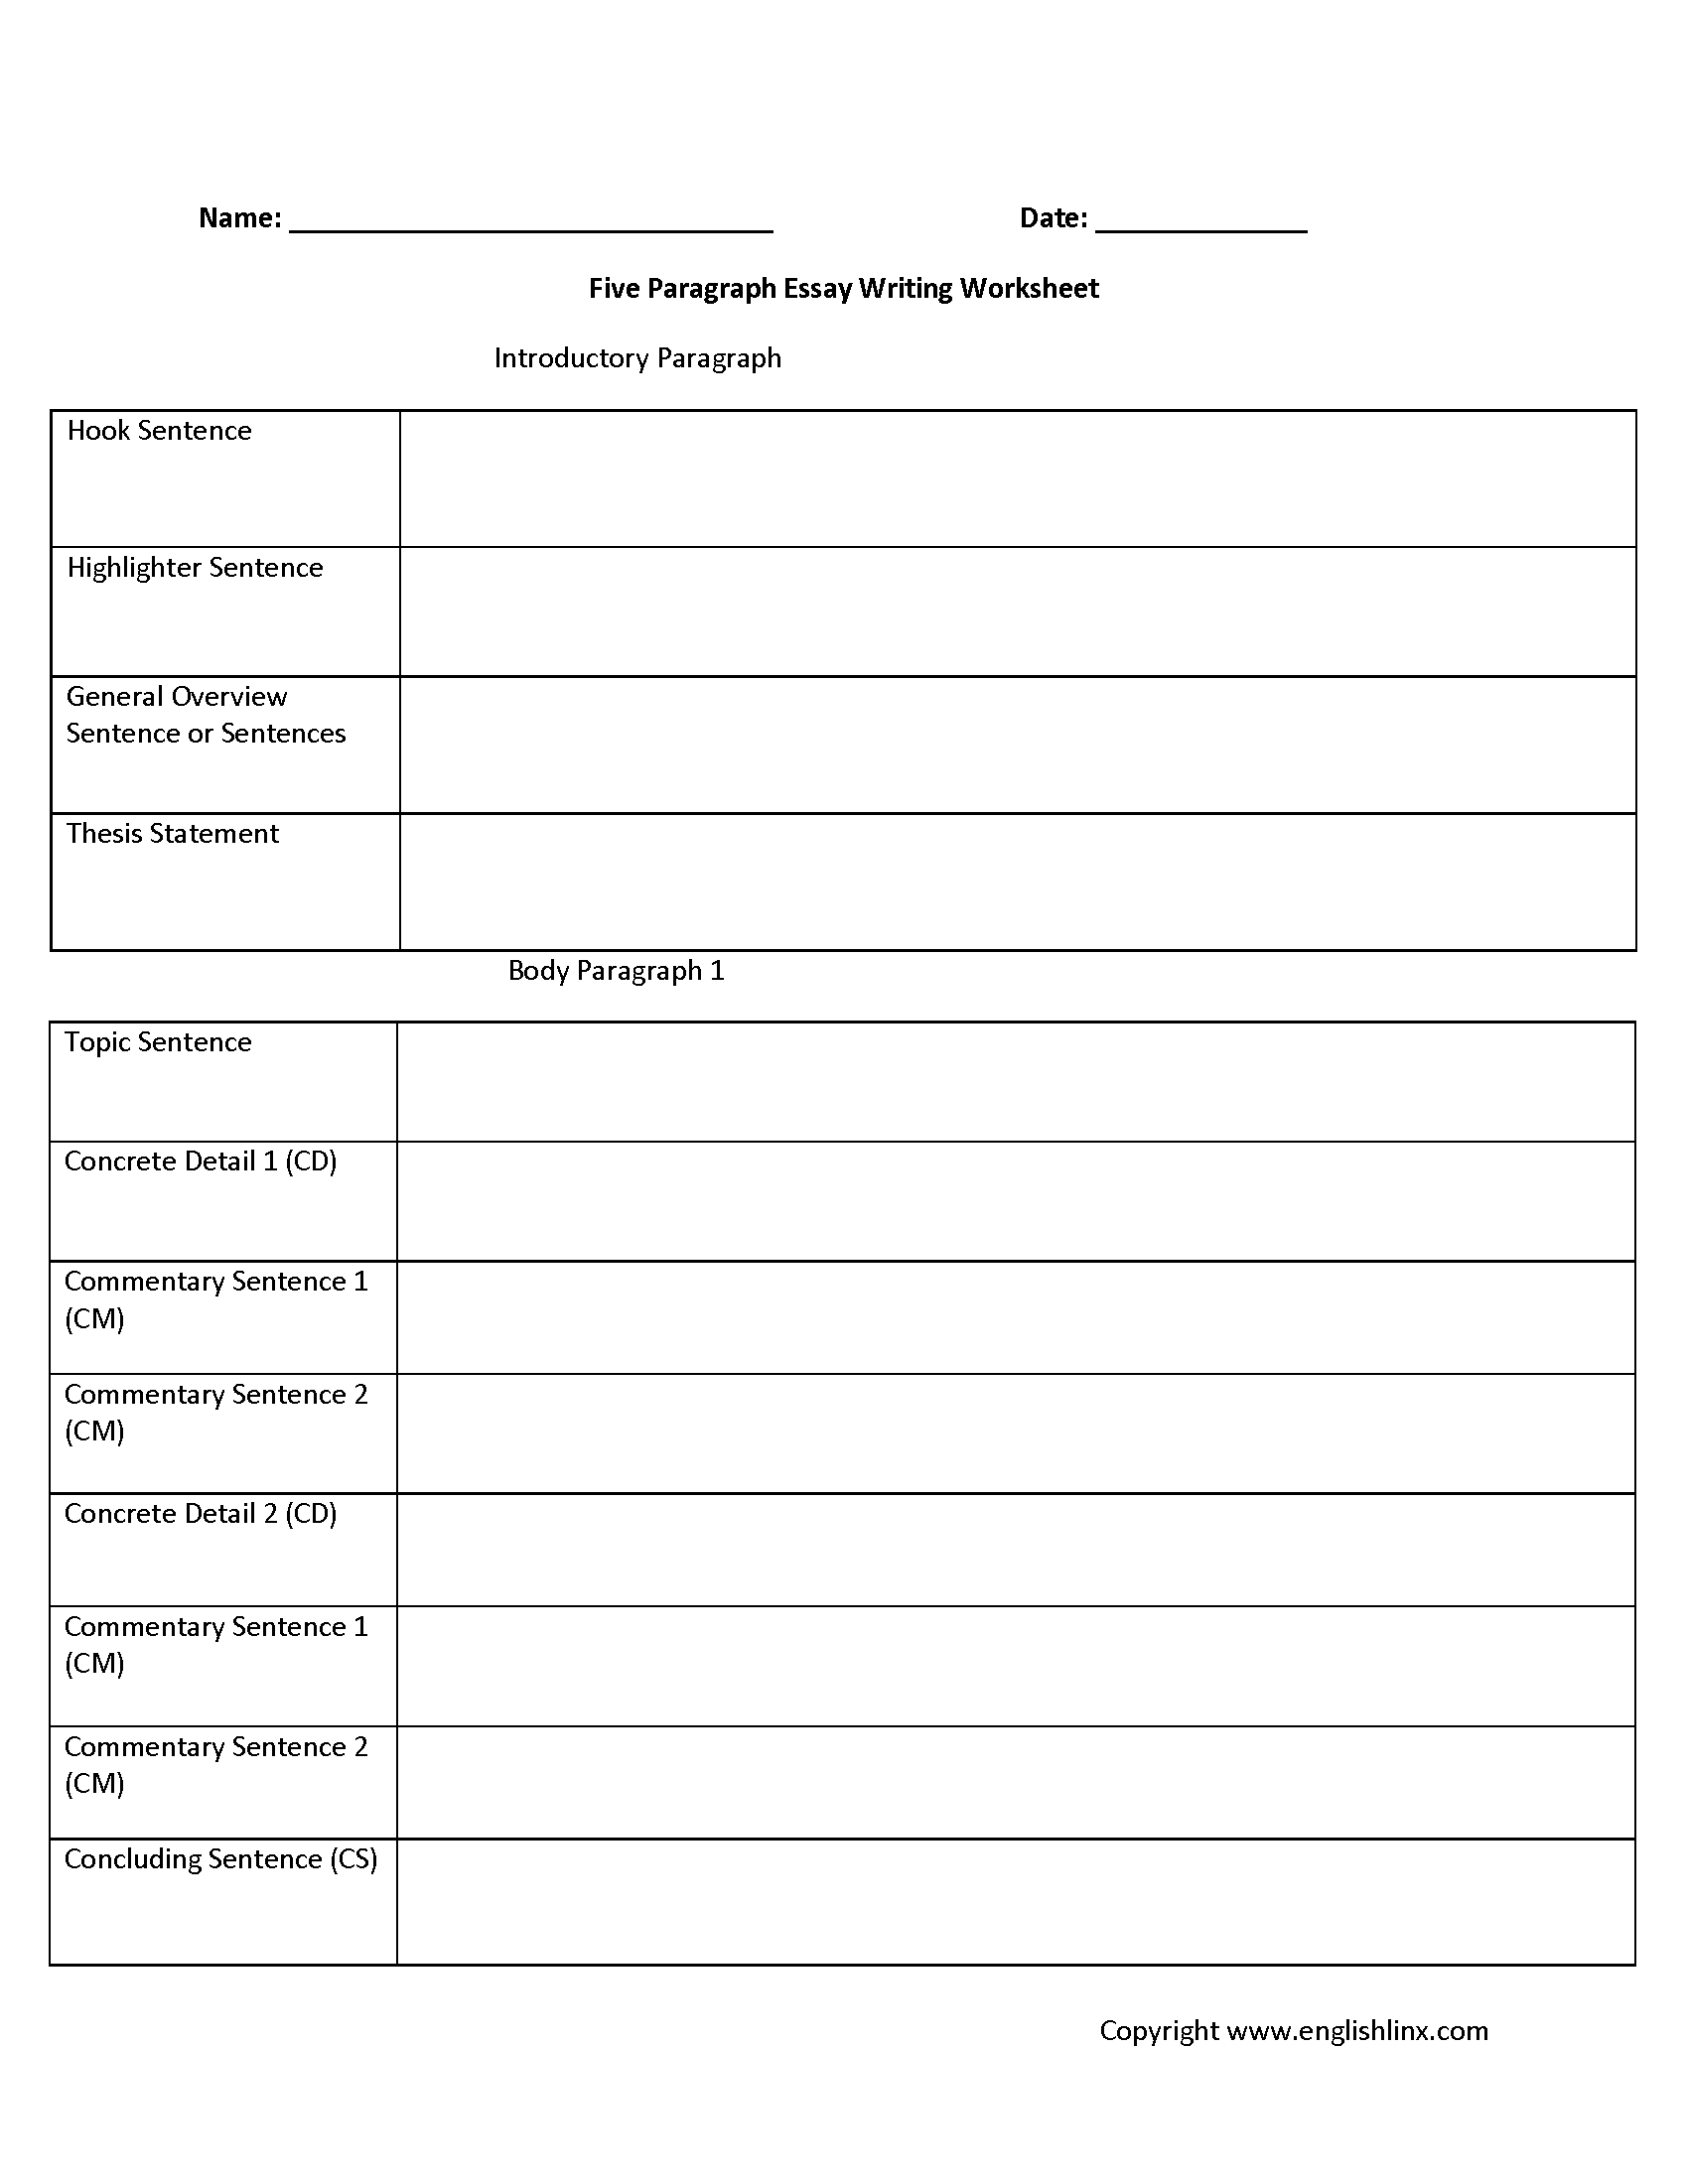 Five Paragraph Graphic Organizers Worksheets